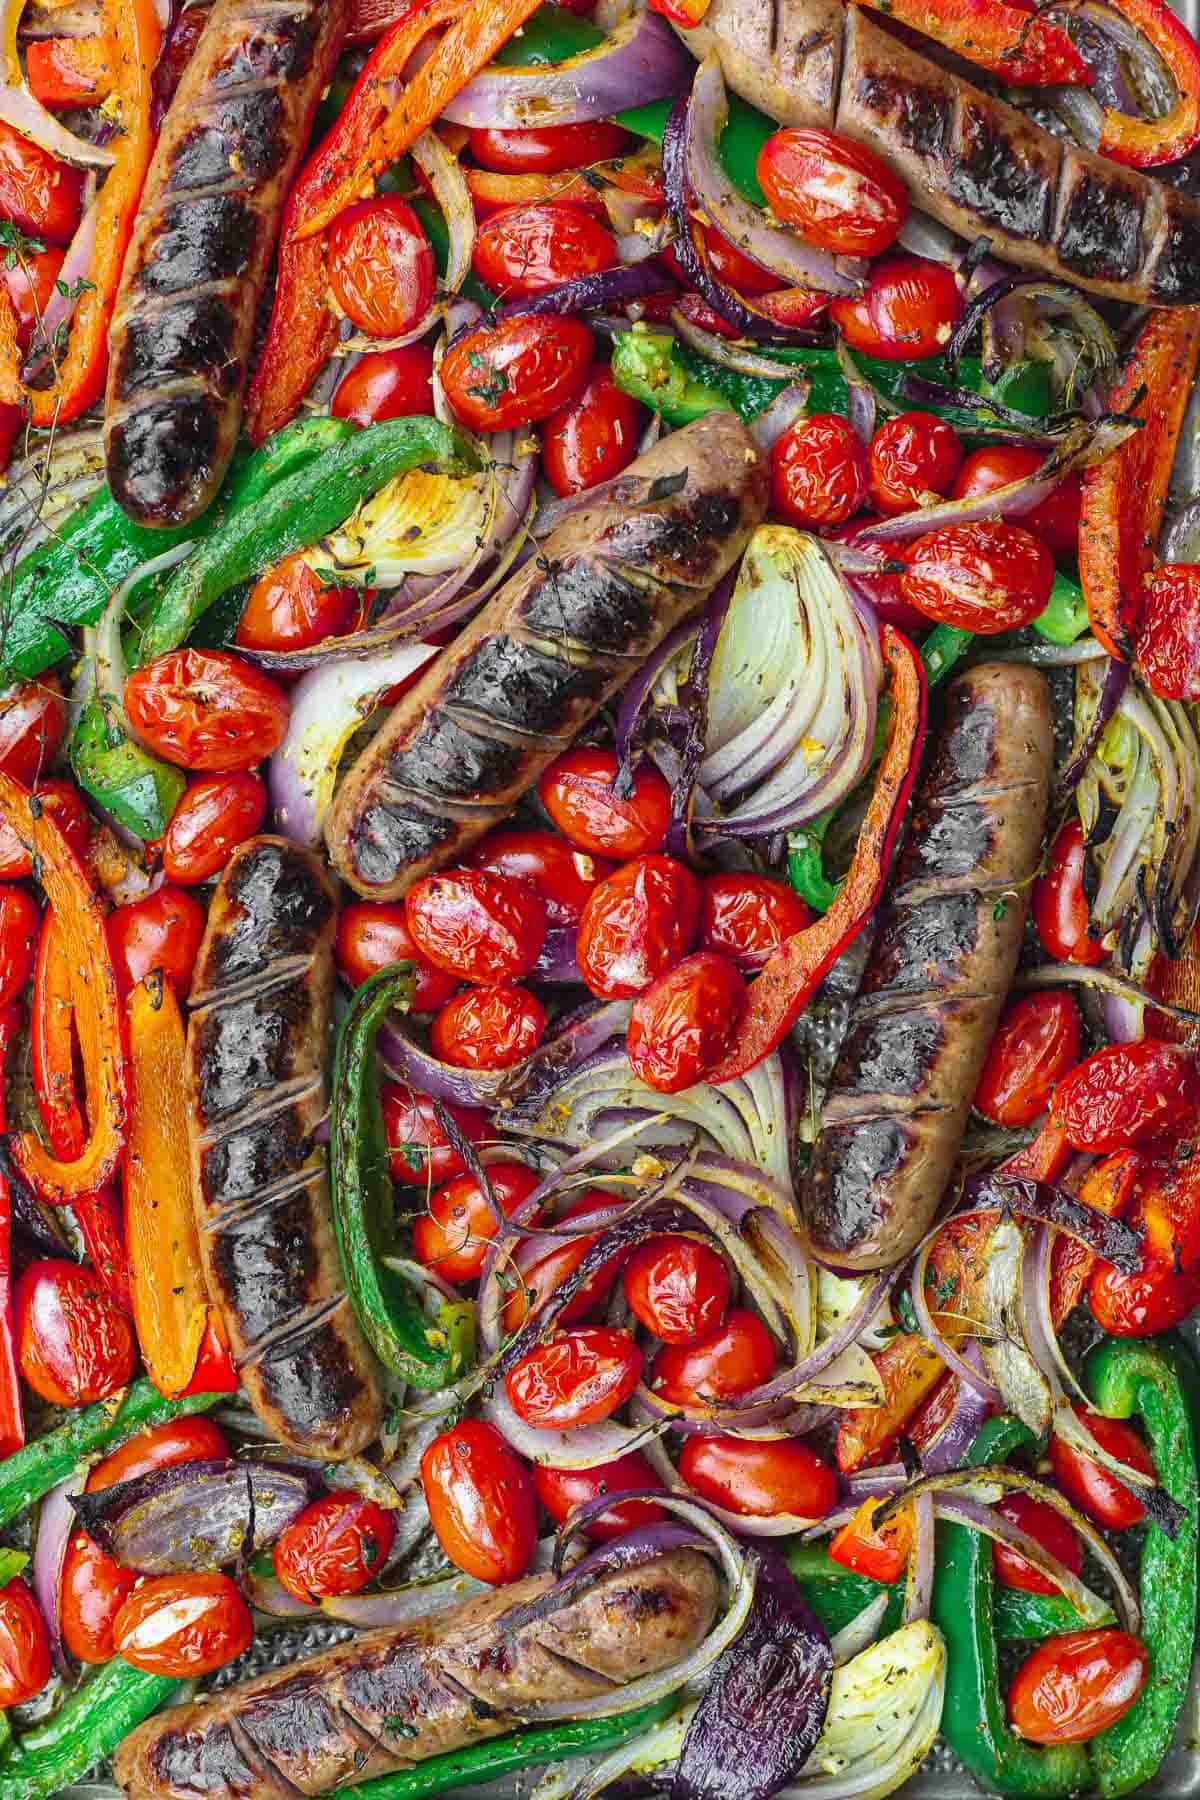 Sausage and Peppers Quarter Sheet Pan Pizza Recipe